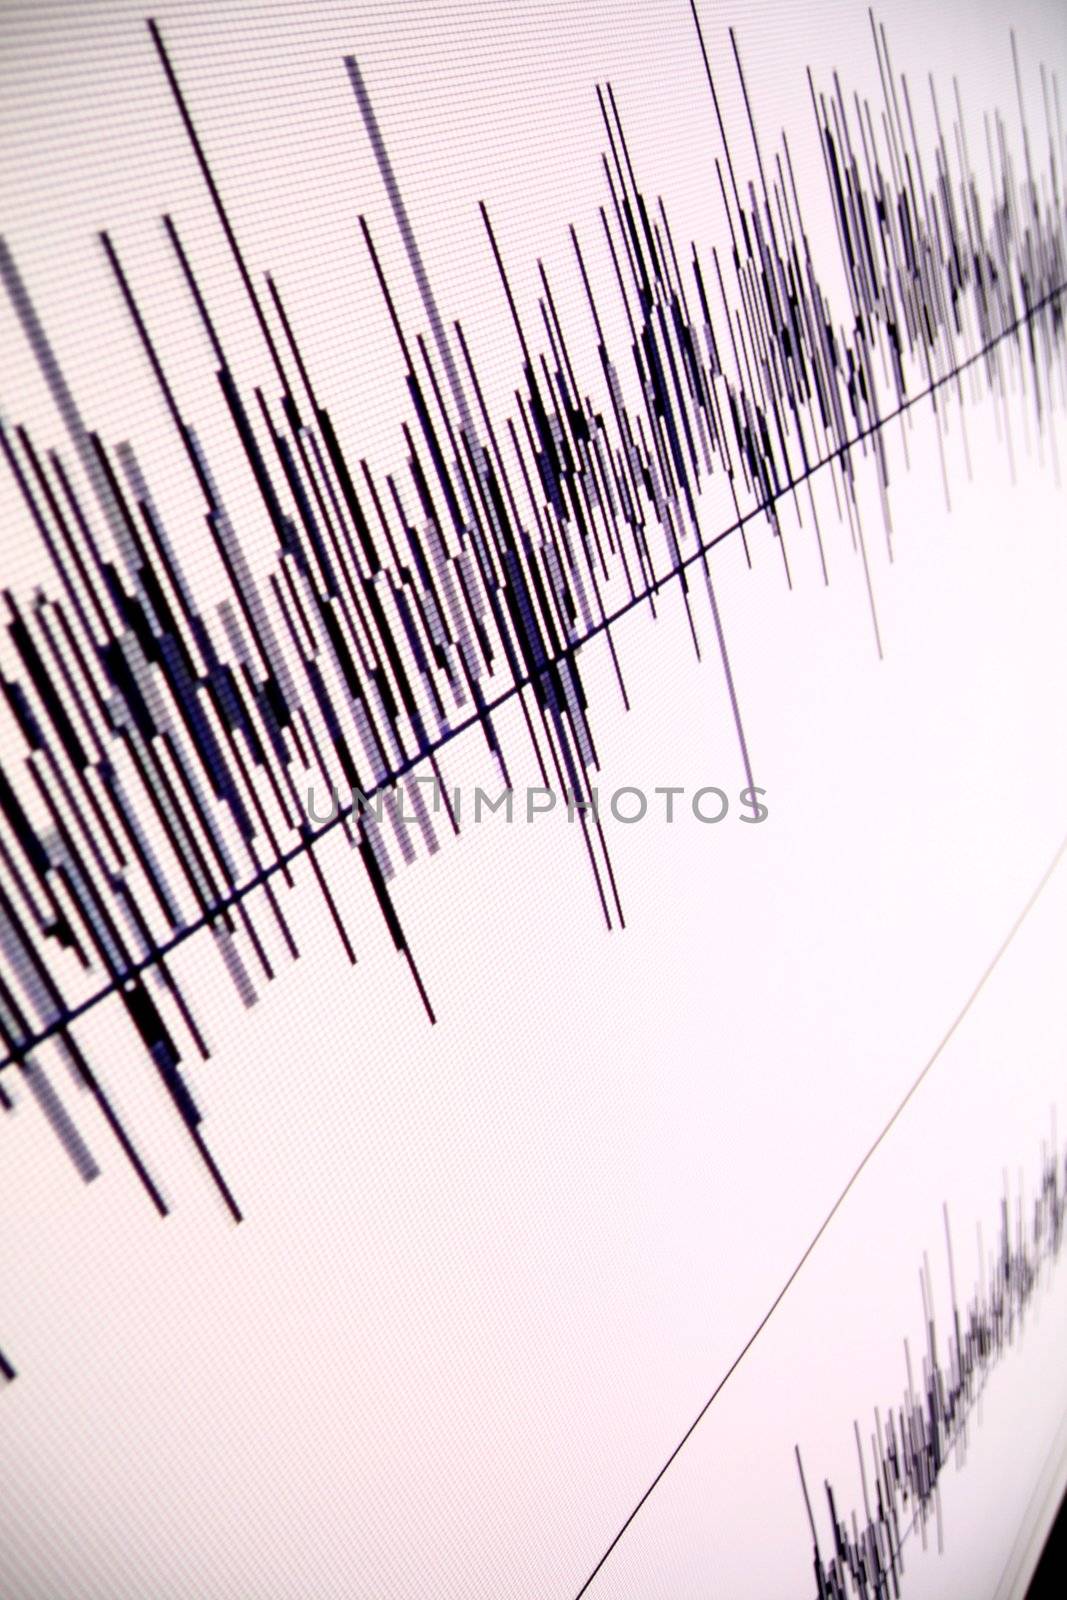 sound audio wave abstract background